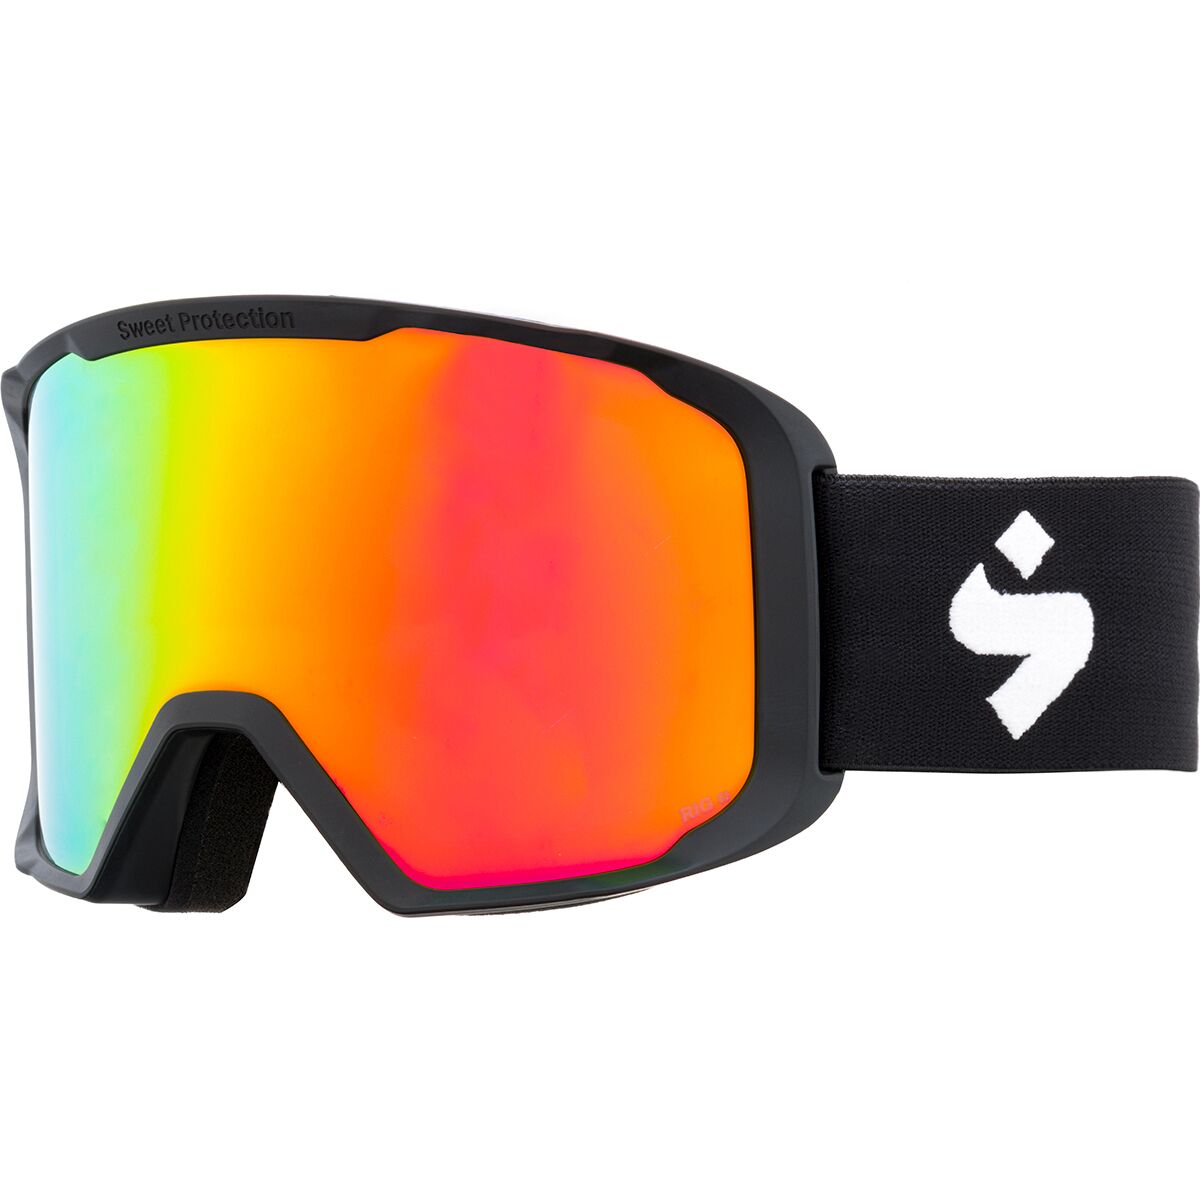 Photos - Ski Goggles Sweet Protection Durden RIG Reflect Goggles 